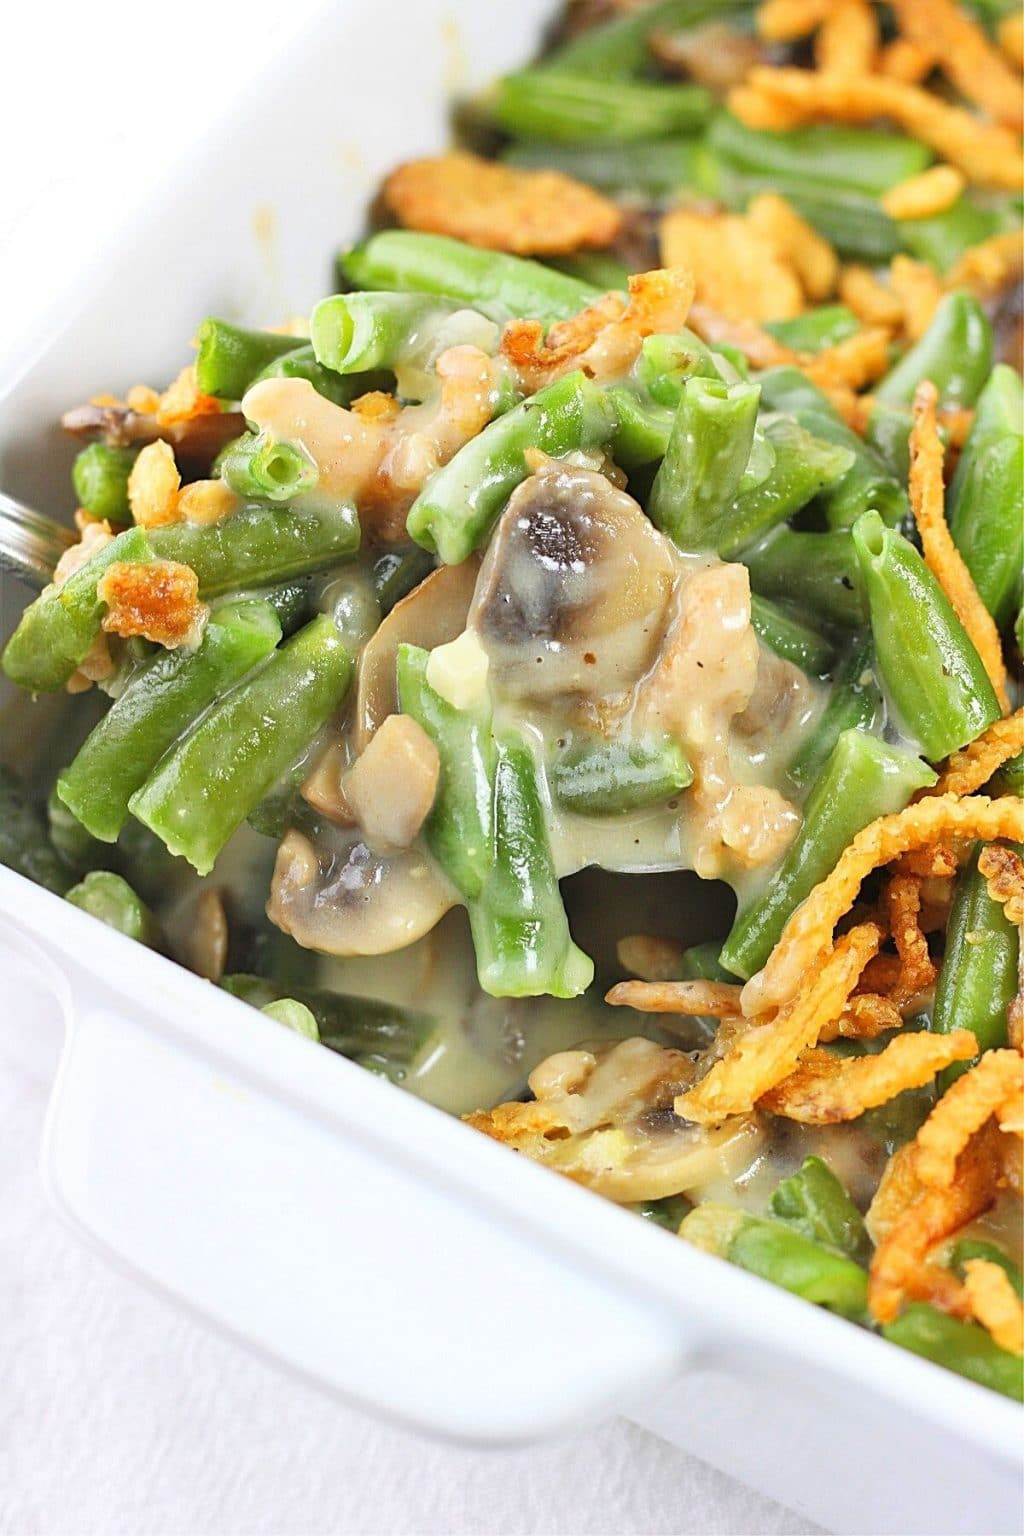 Canned Green Bean Casserole Fresh Easy Green Bean Casserole No Canned soup • now Cook This